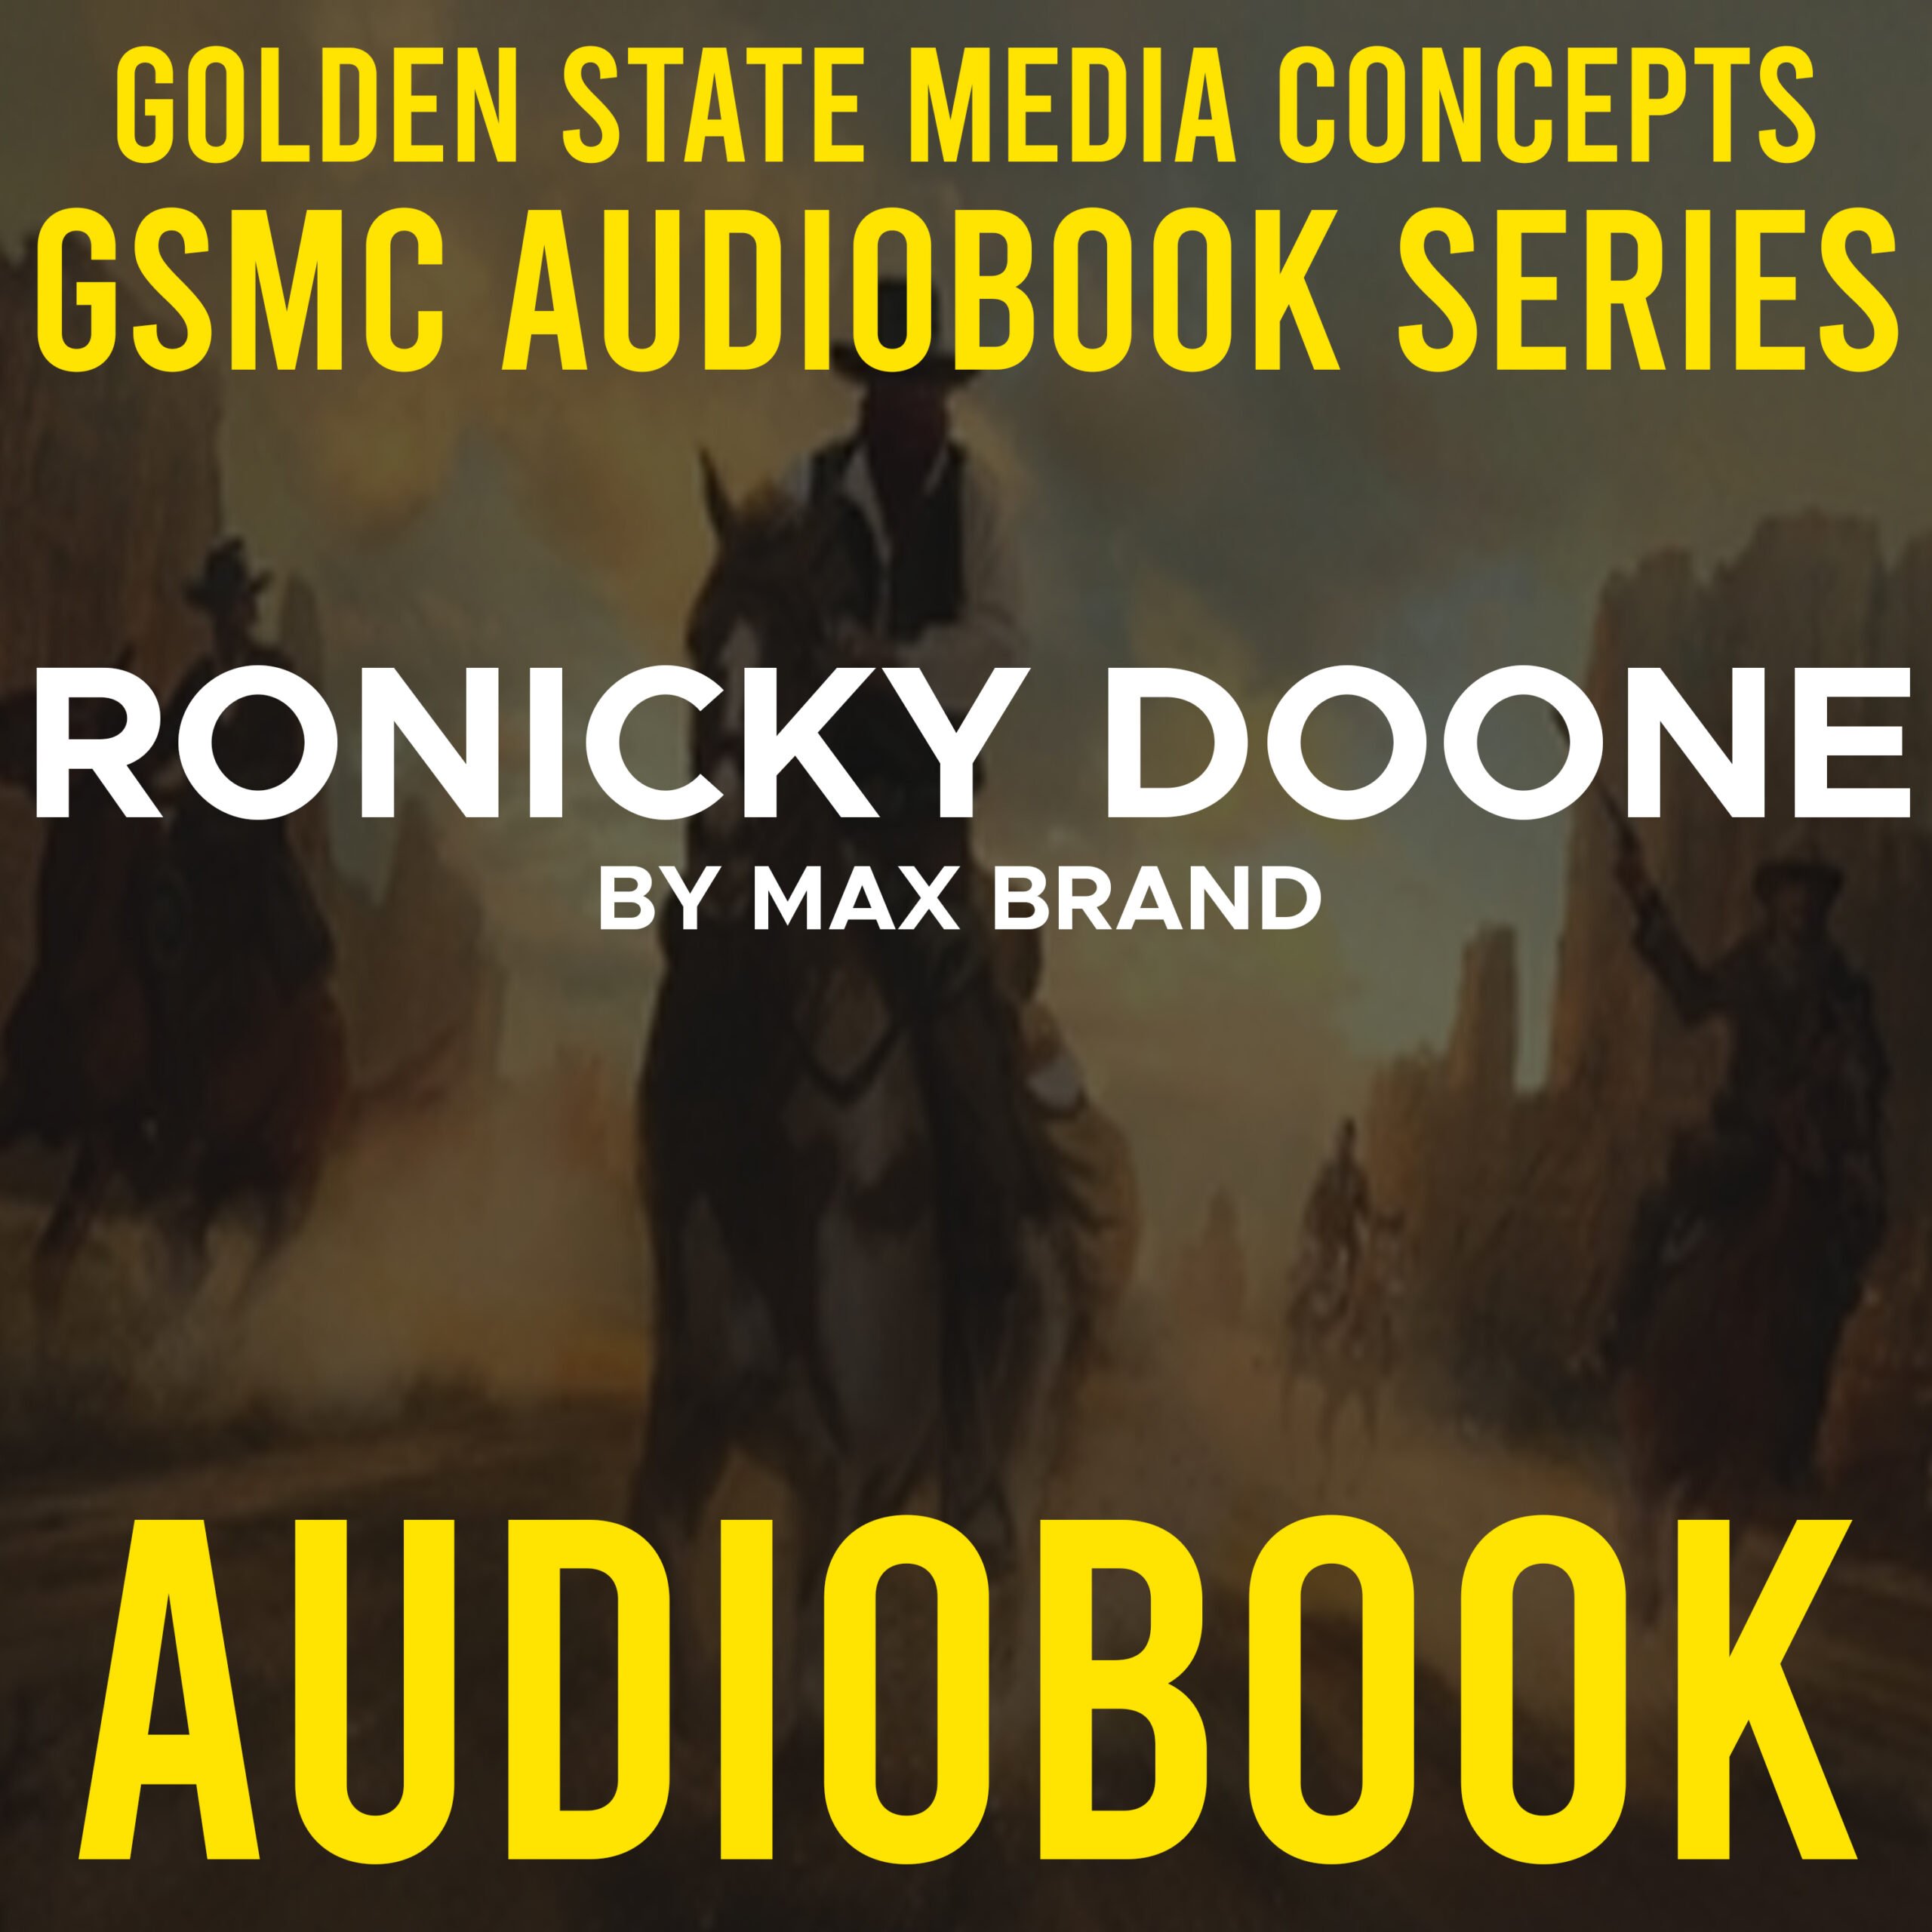 GSMC Audiobook Series: Ronicky Doone by Max Brand